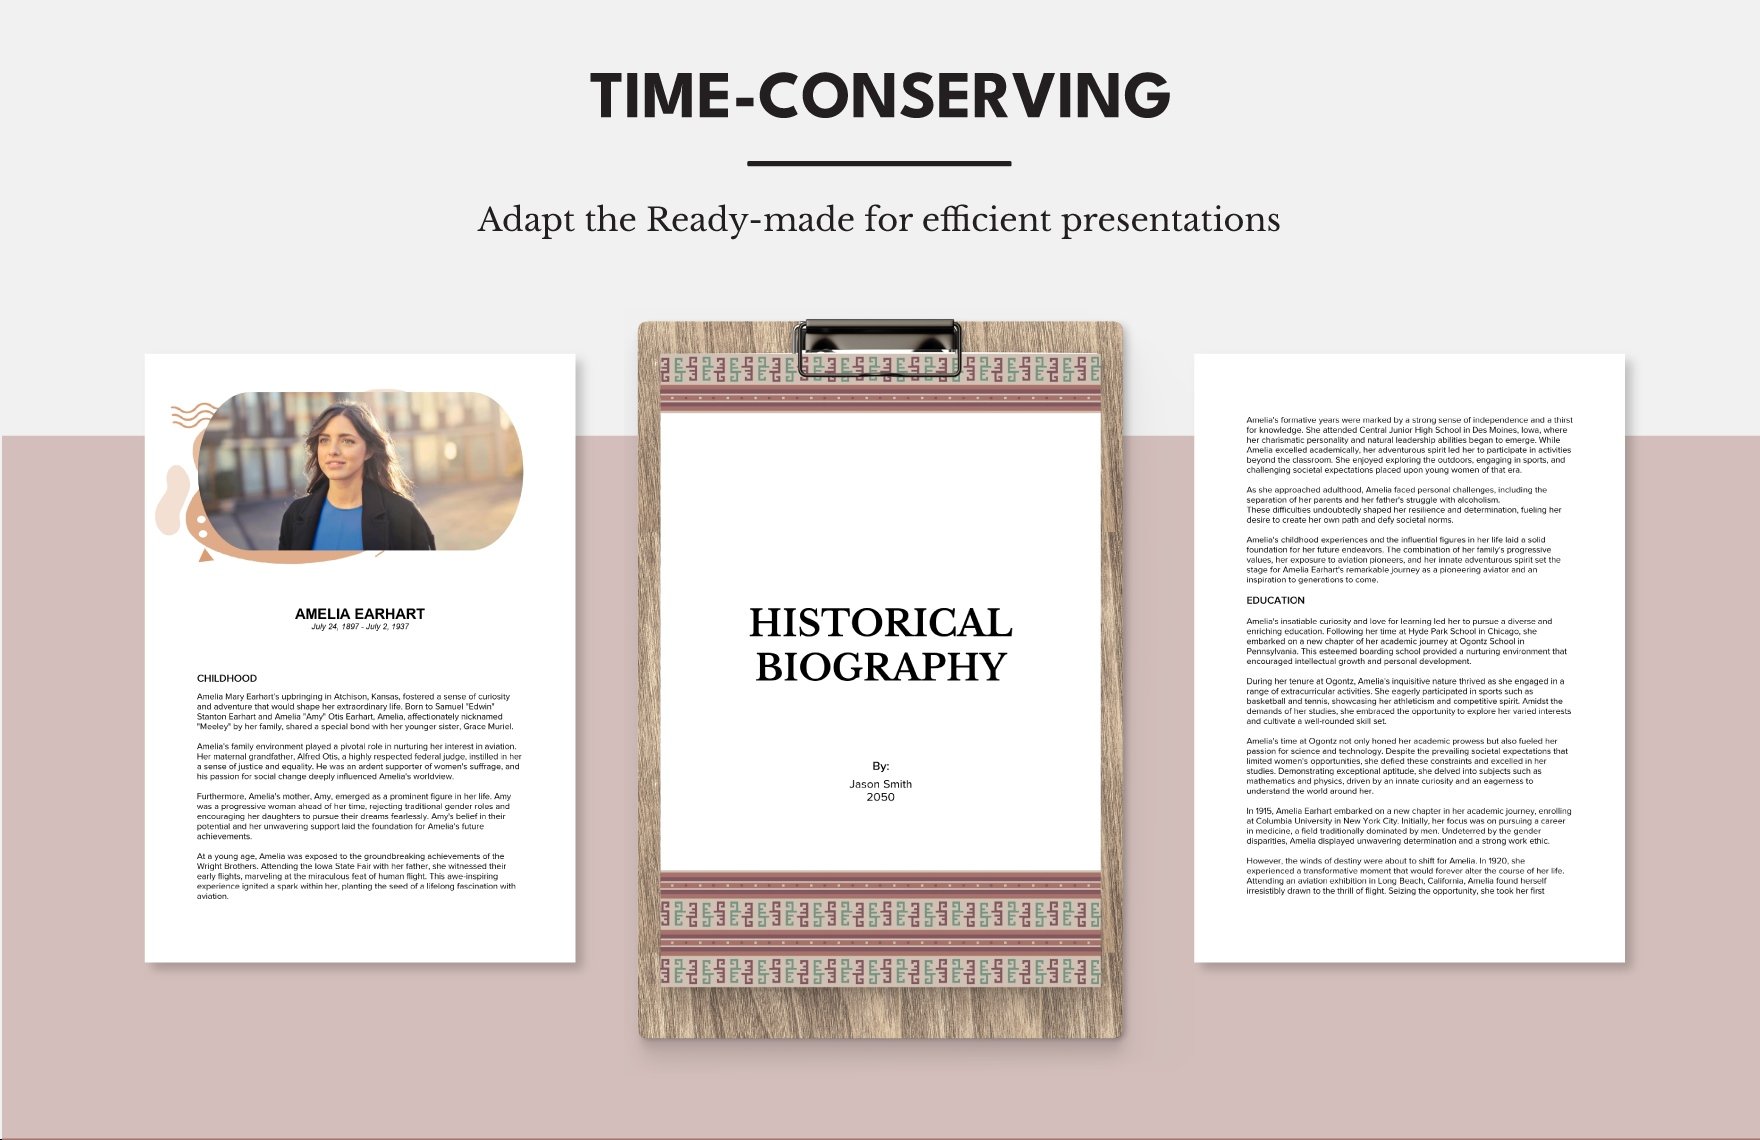 Historical Biography Template